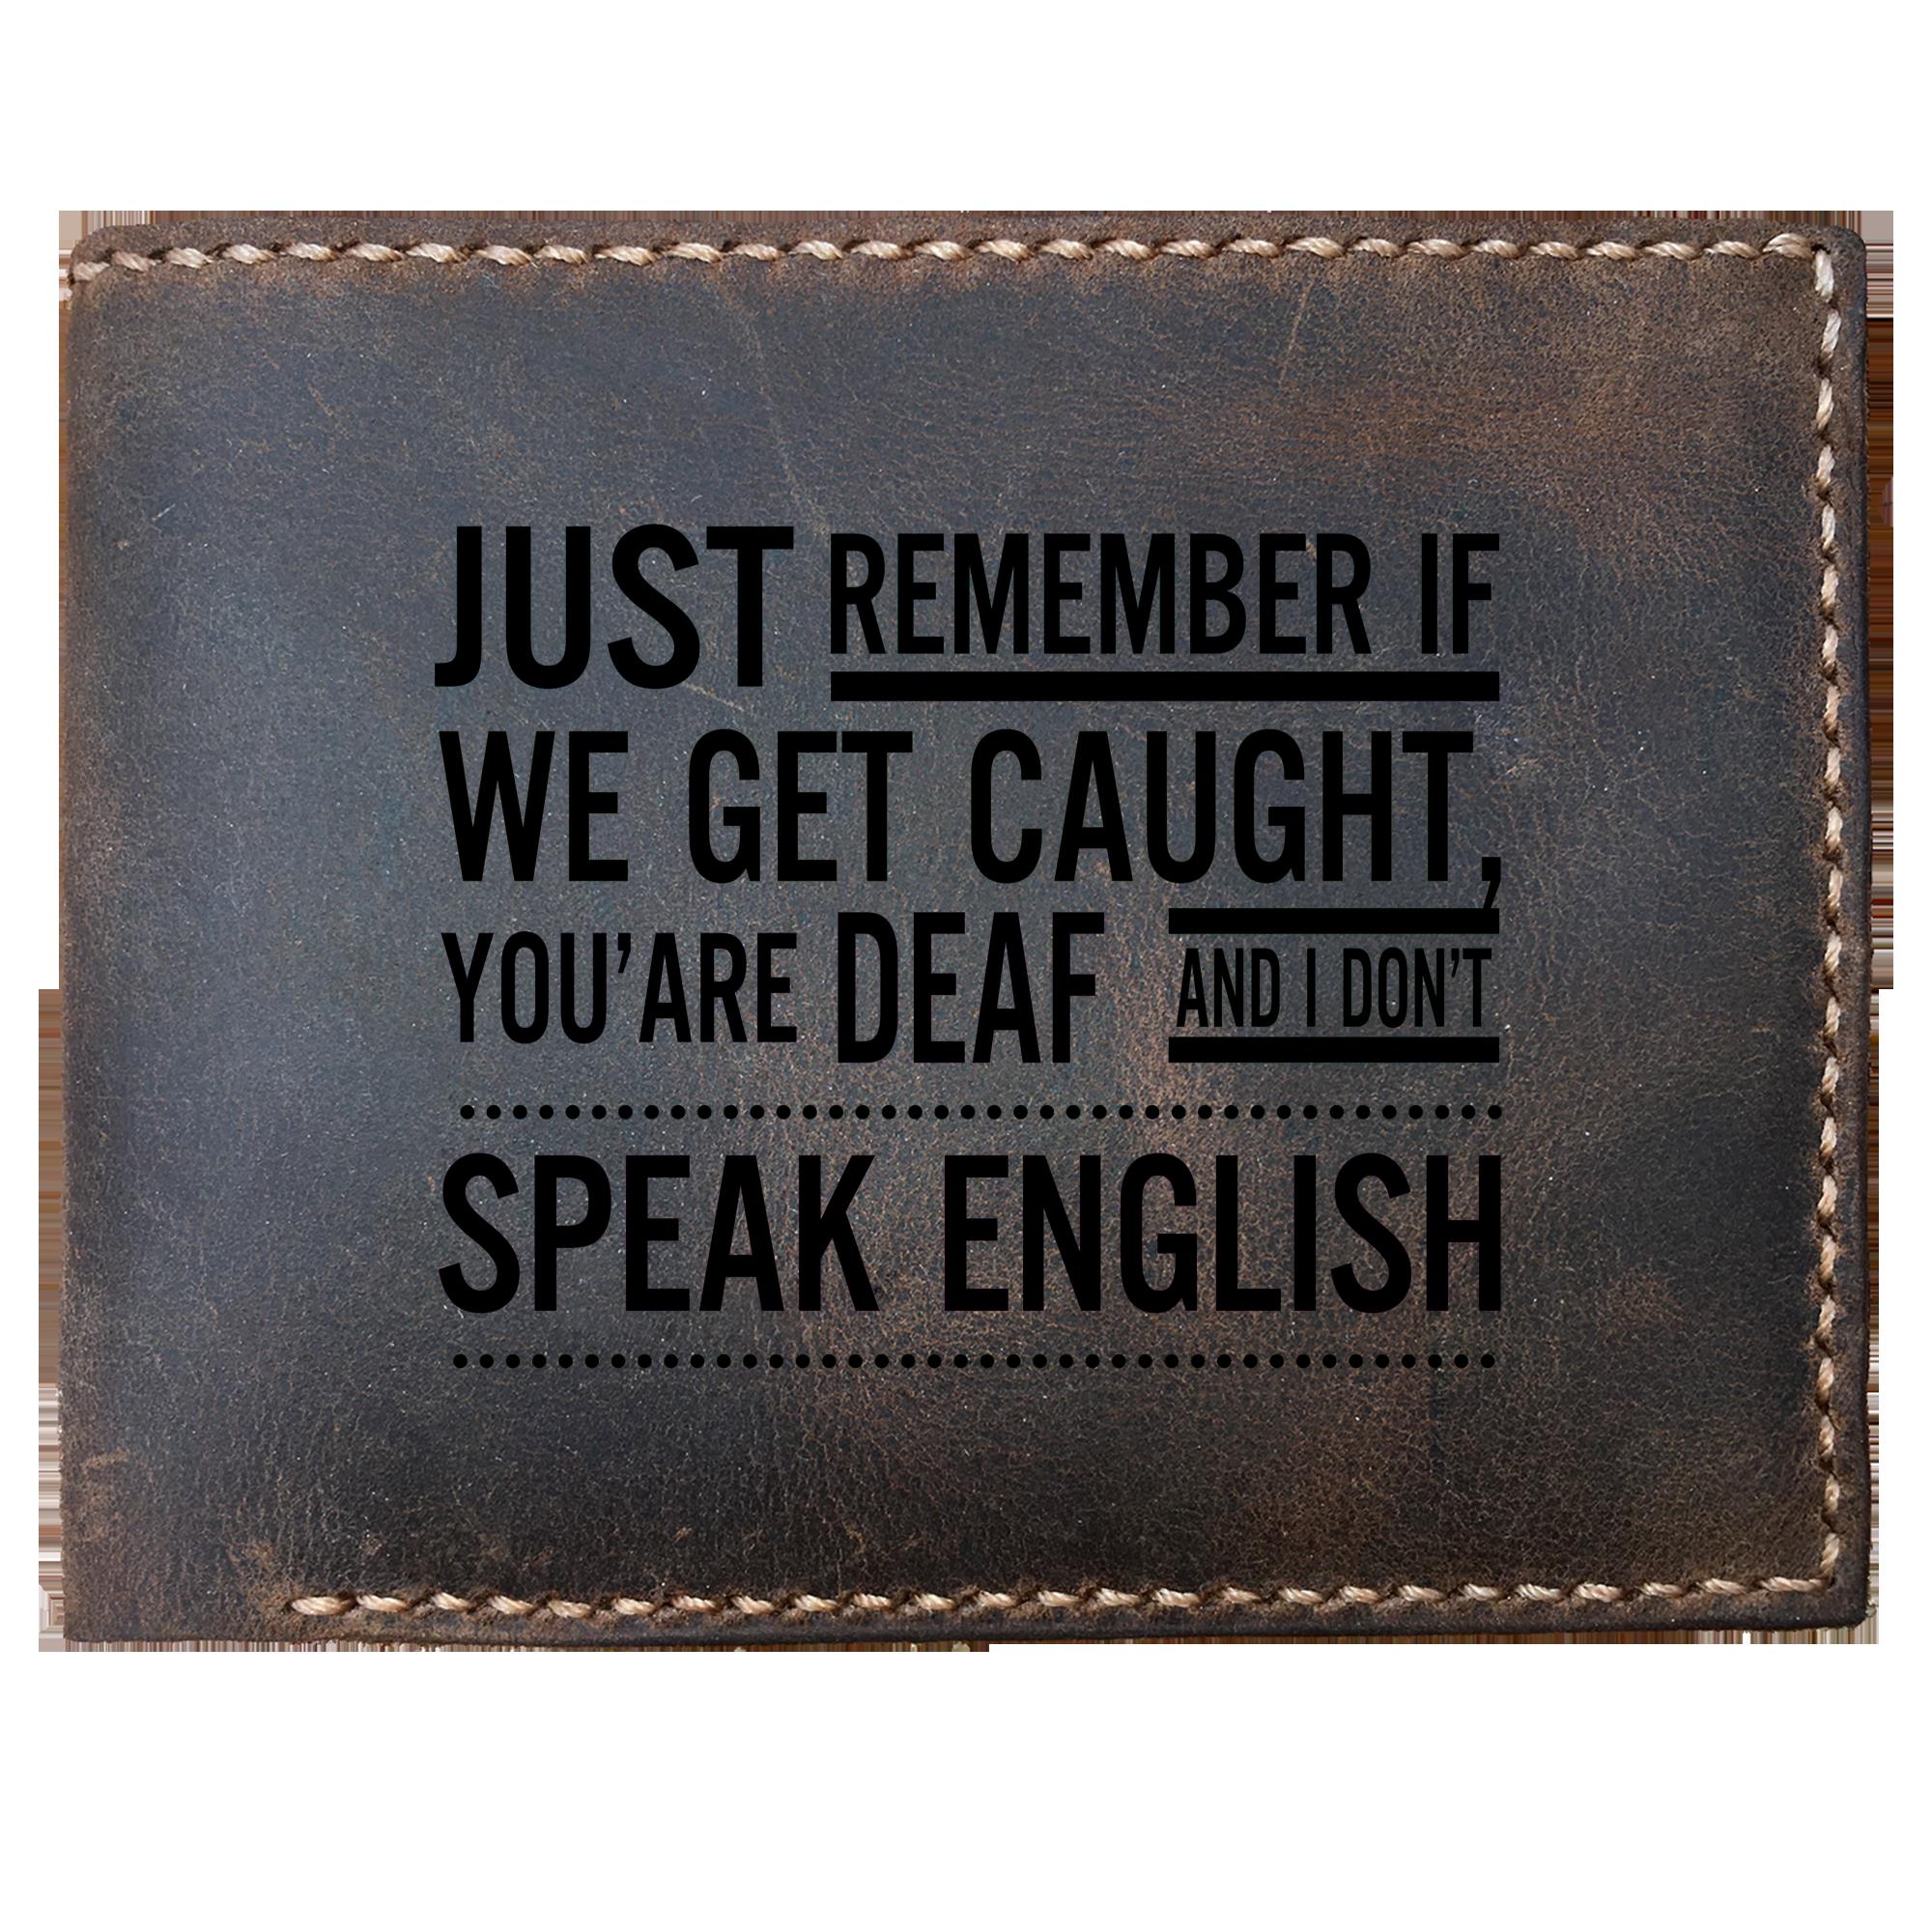 Skitongifts Funny Custom Laser Engraved Bifold Leather Wallet For Men, Just Remember If We Get Caught, You Are Deaf And I Dont Speak English